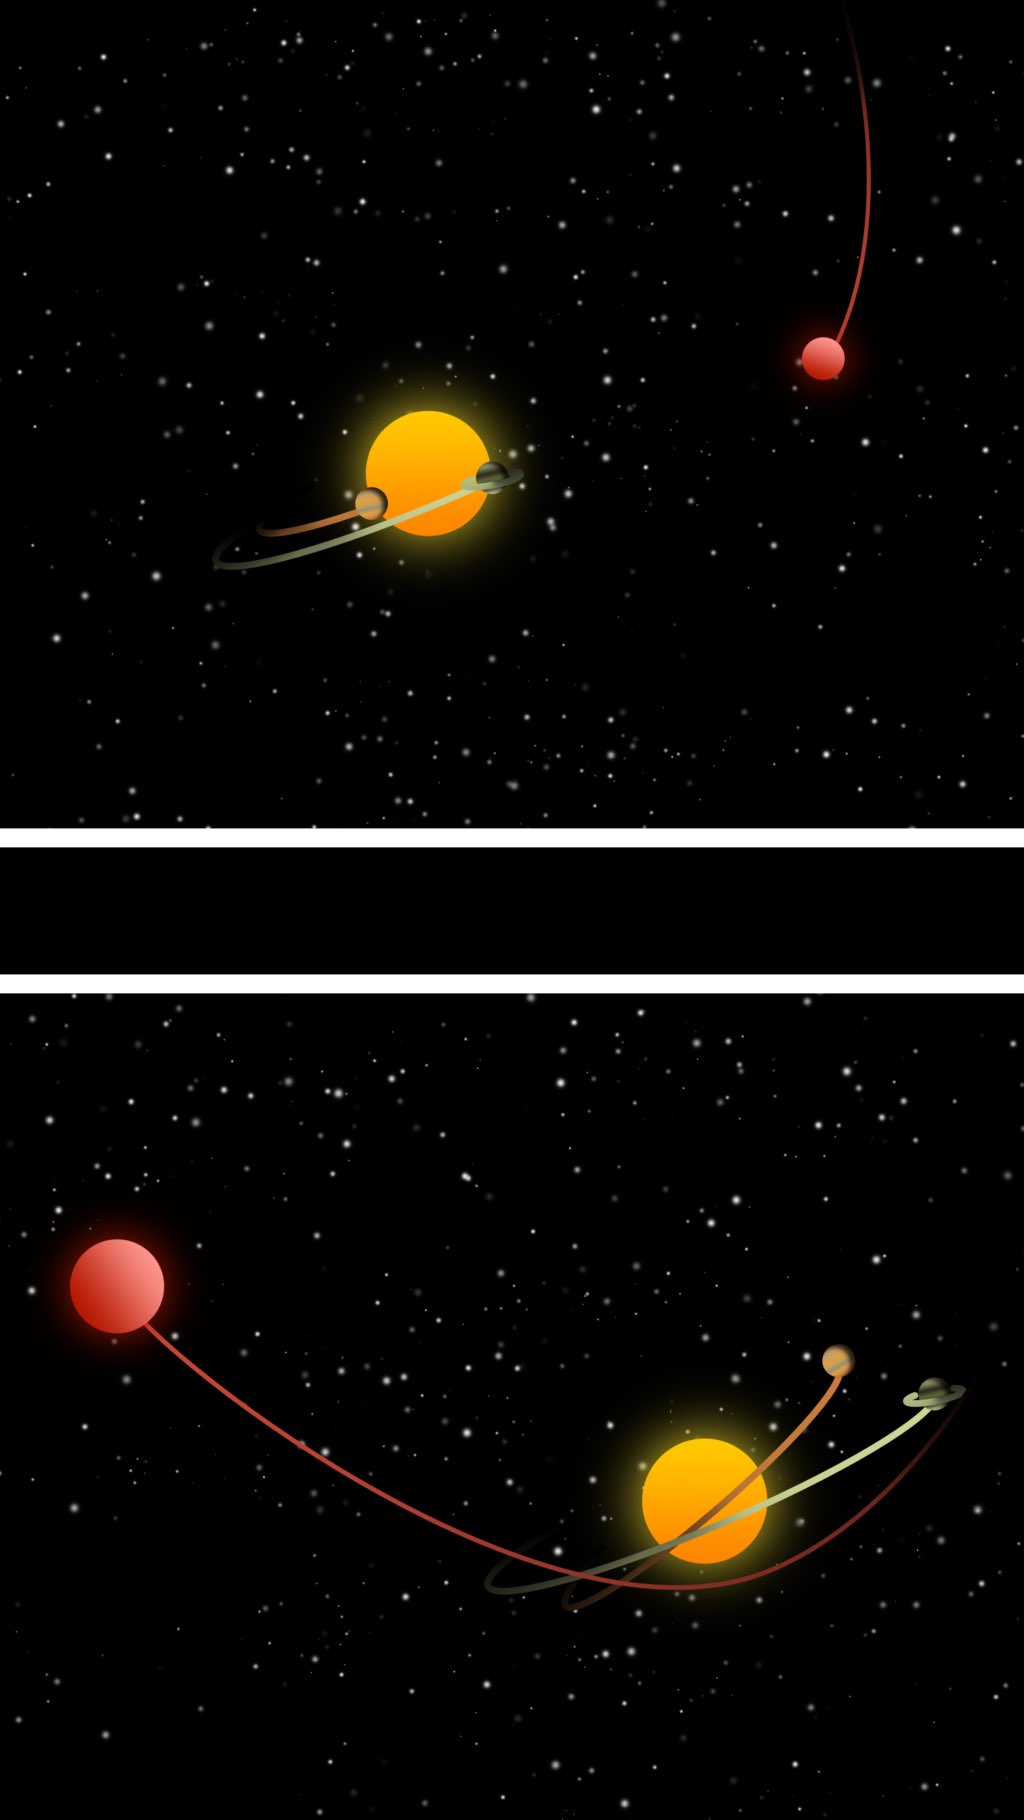 Two panels showing an artist rendering of a stellar flyby passing a sun-like star with Jupiter and Saturn-like planets.